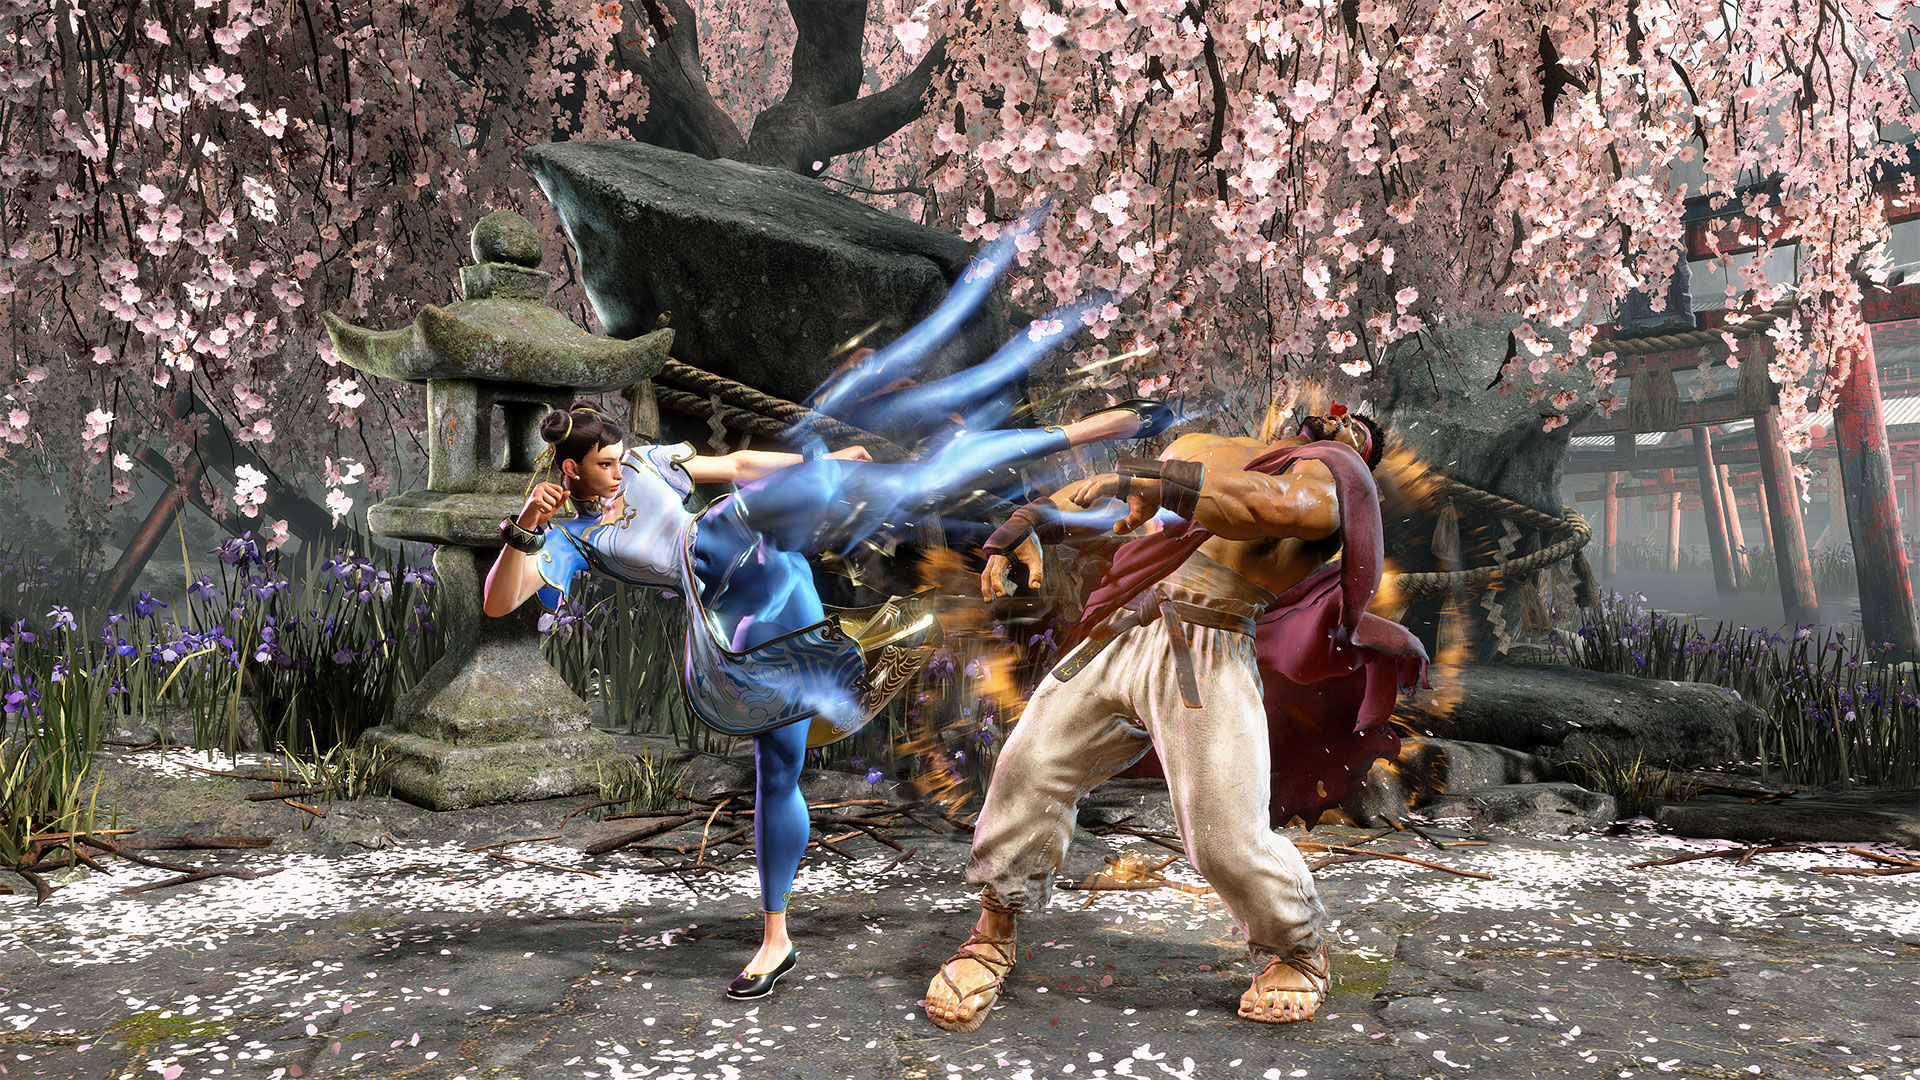 Tekken 8 Release Date Was Delayed to Avoid Street Fighter 6 - PlayStation  LifeStyle